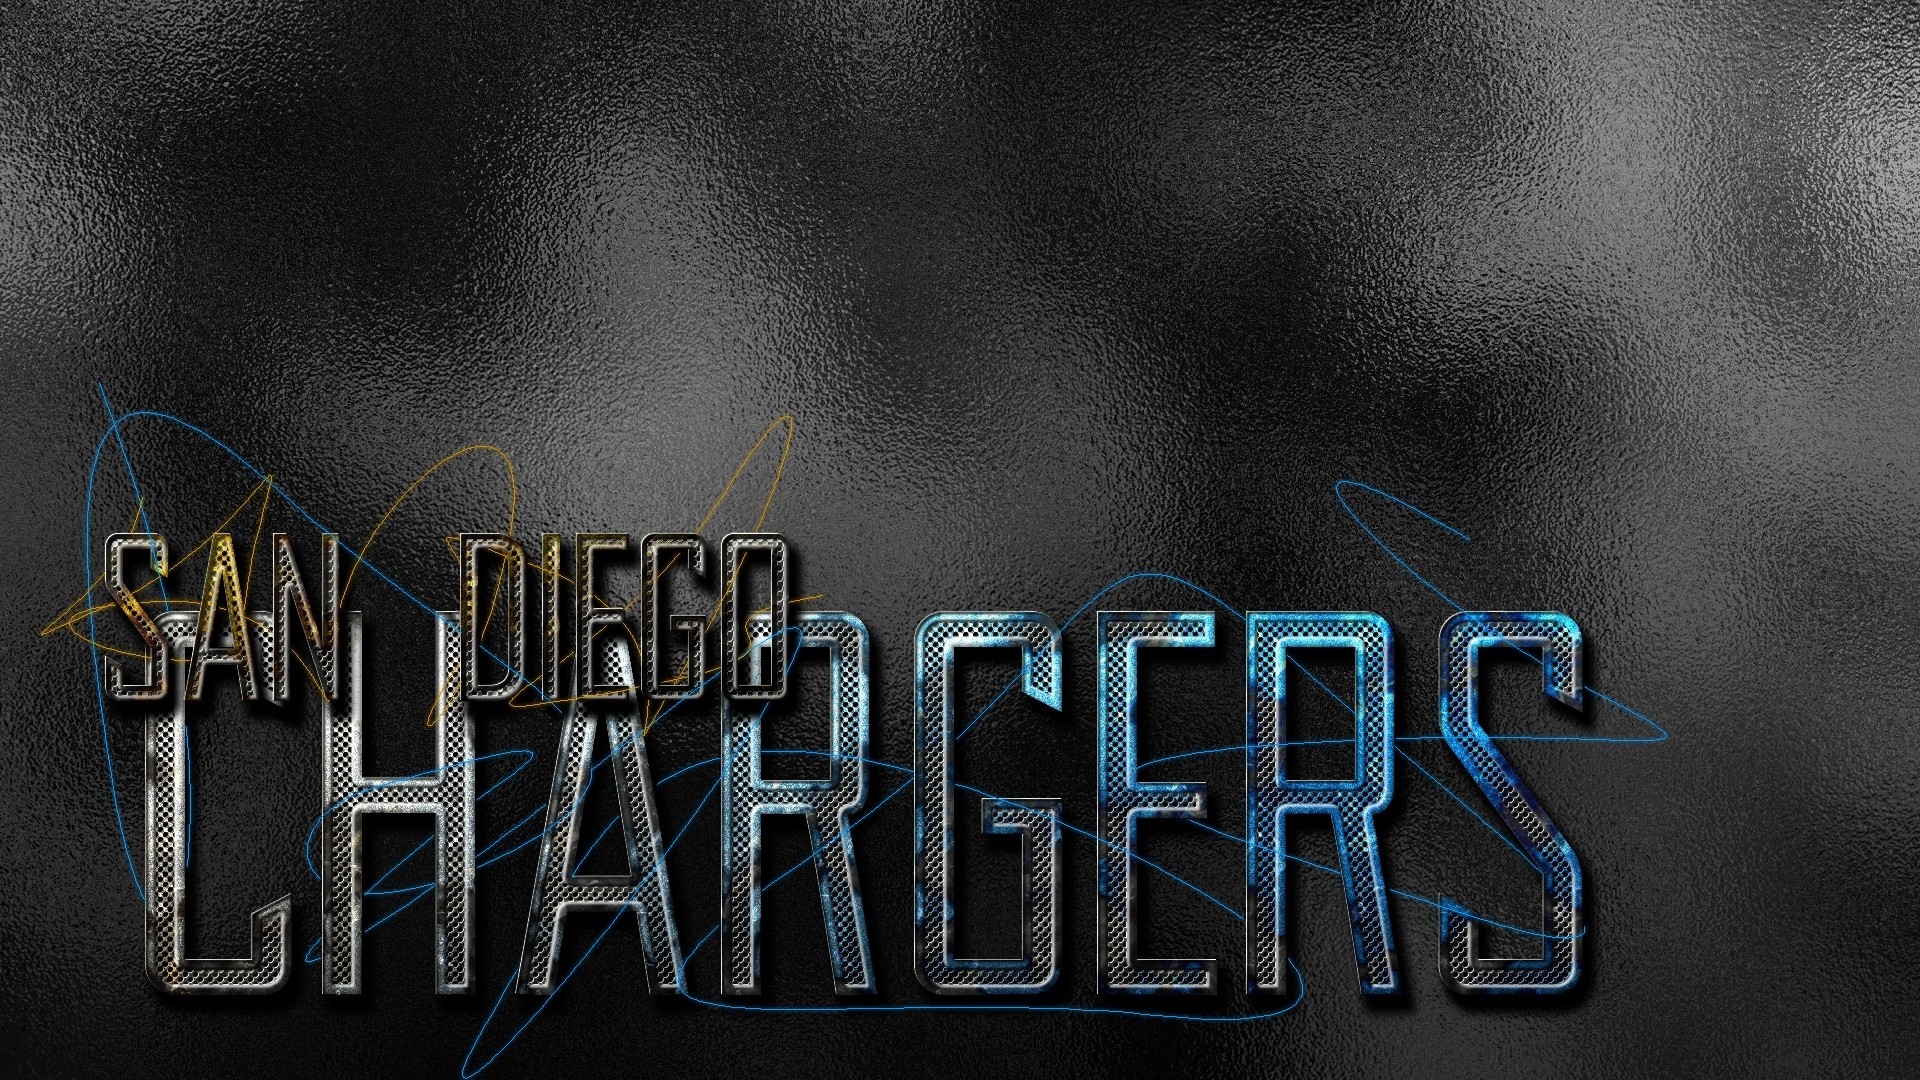 1920x1080 1920x1200 Chargers Wallpaper Awesome San Diego Chargers Widescreen Wallpaper  by Hd Wallpapers Daily